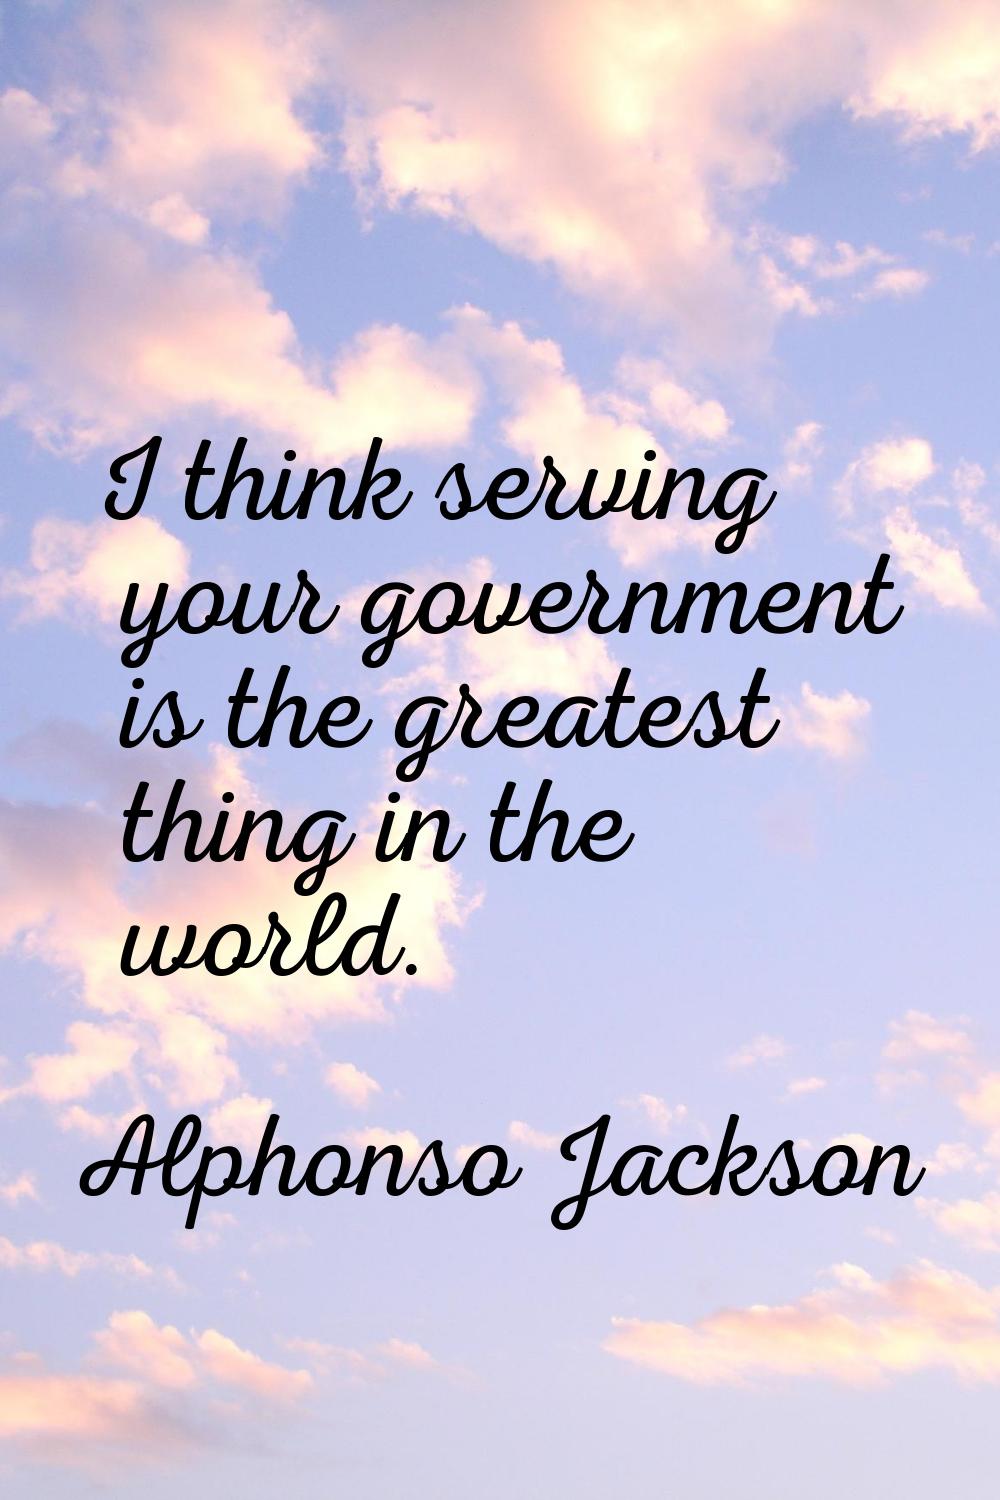 I think serving your government is the greatest thing in the world.